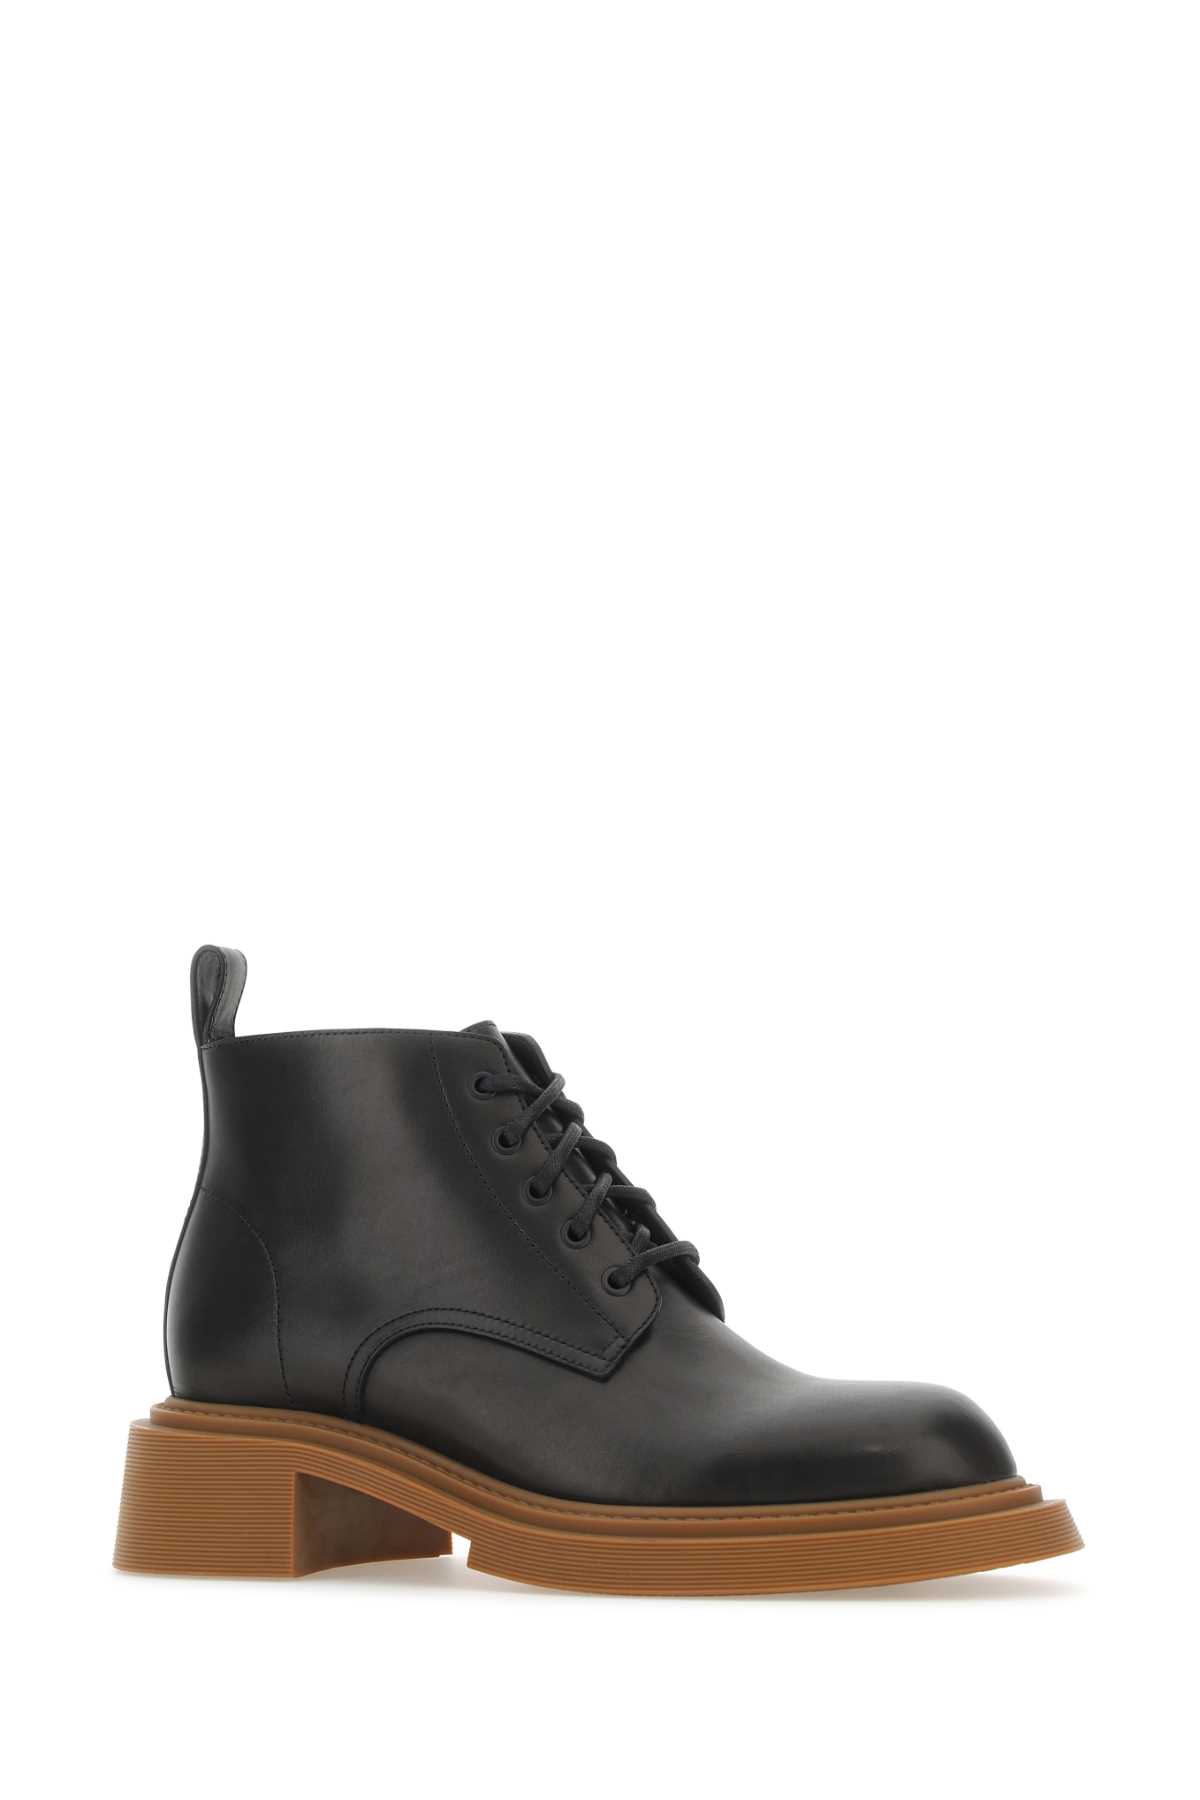 Loewe Black Leather Ankle Boots